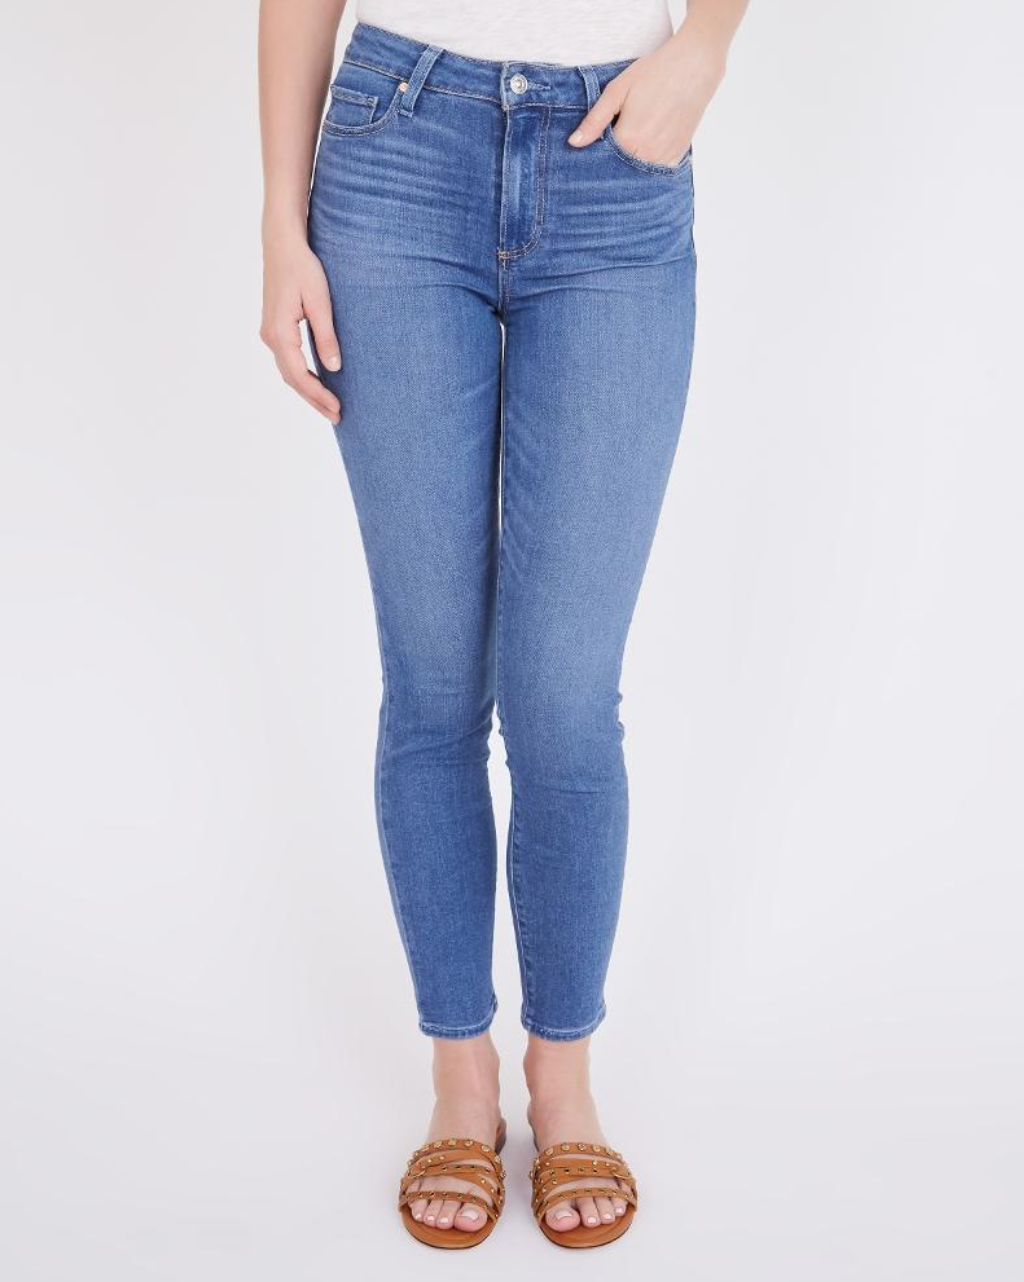 PAIGE JEANS - Hoxton Ankle High Rise Skinny - Demilo